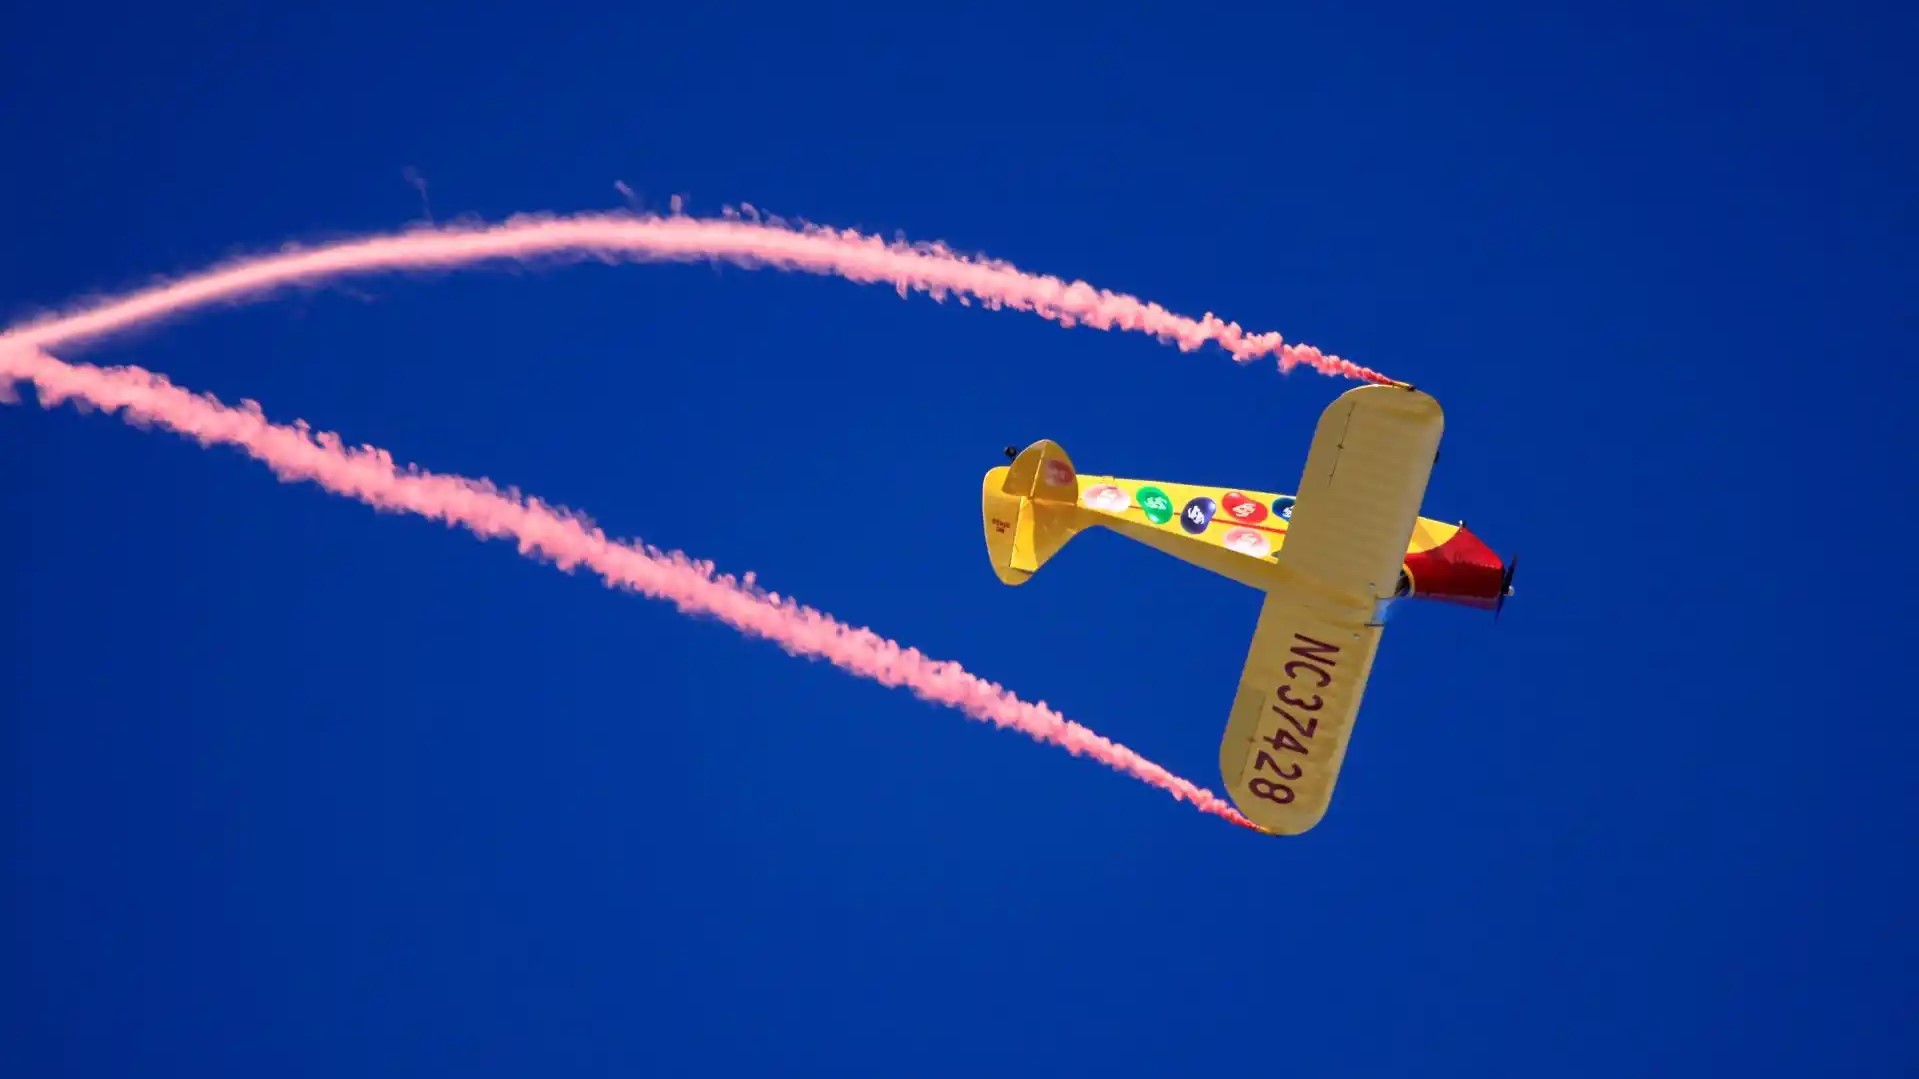 Jelly Belly Aircraft performing barrel roll with smoke